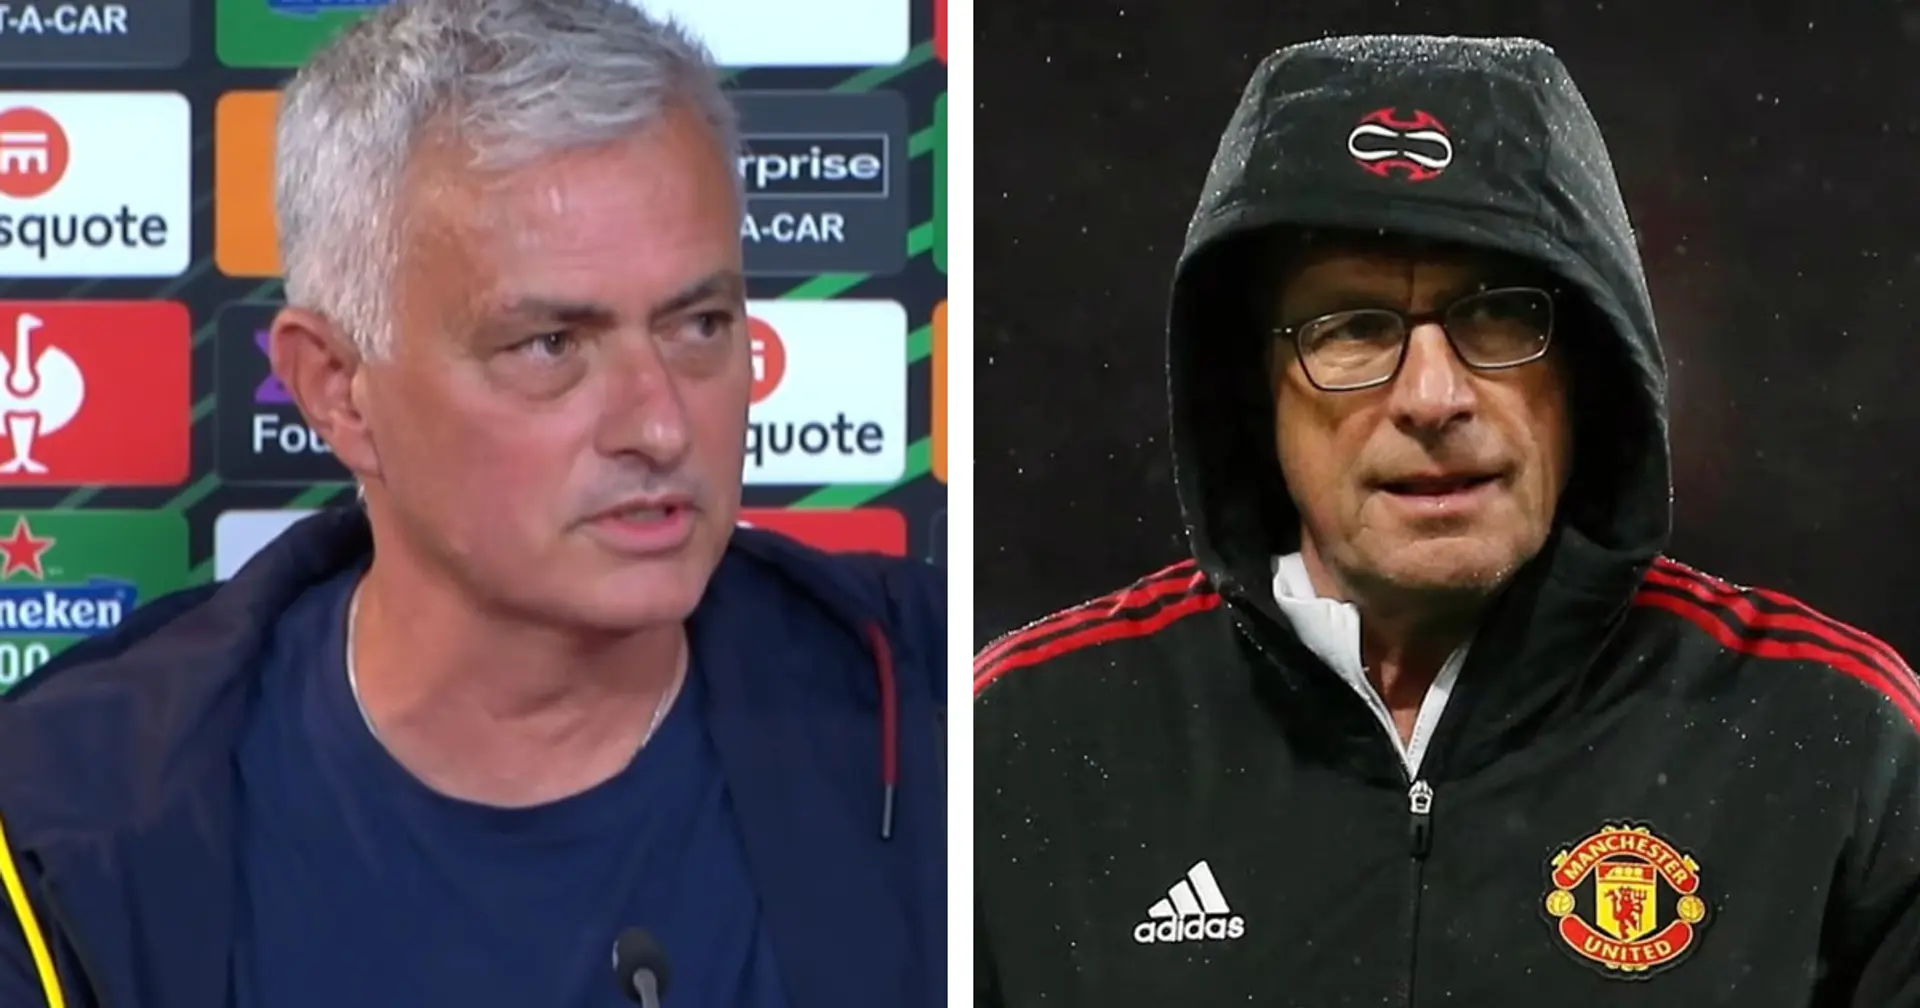 Jose Mourinho takes subtle dig at Man United after Europa Conference League win with AS Roma